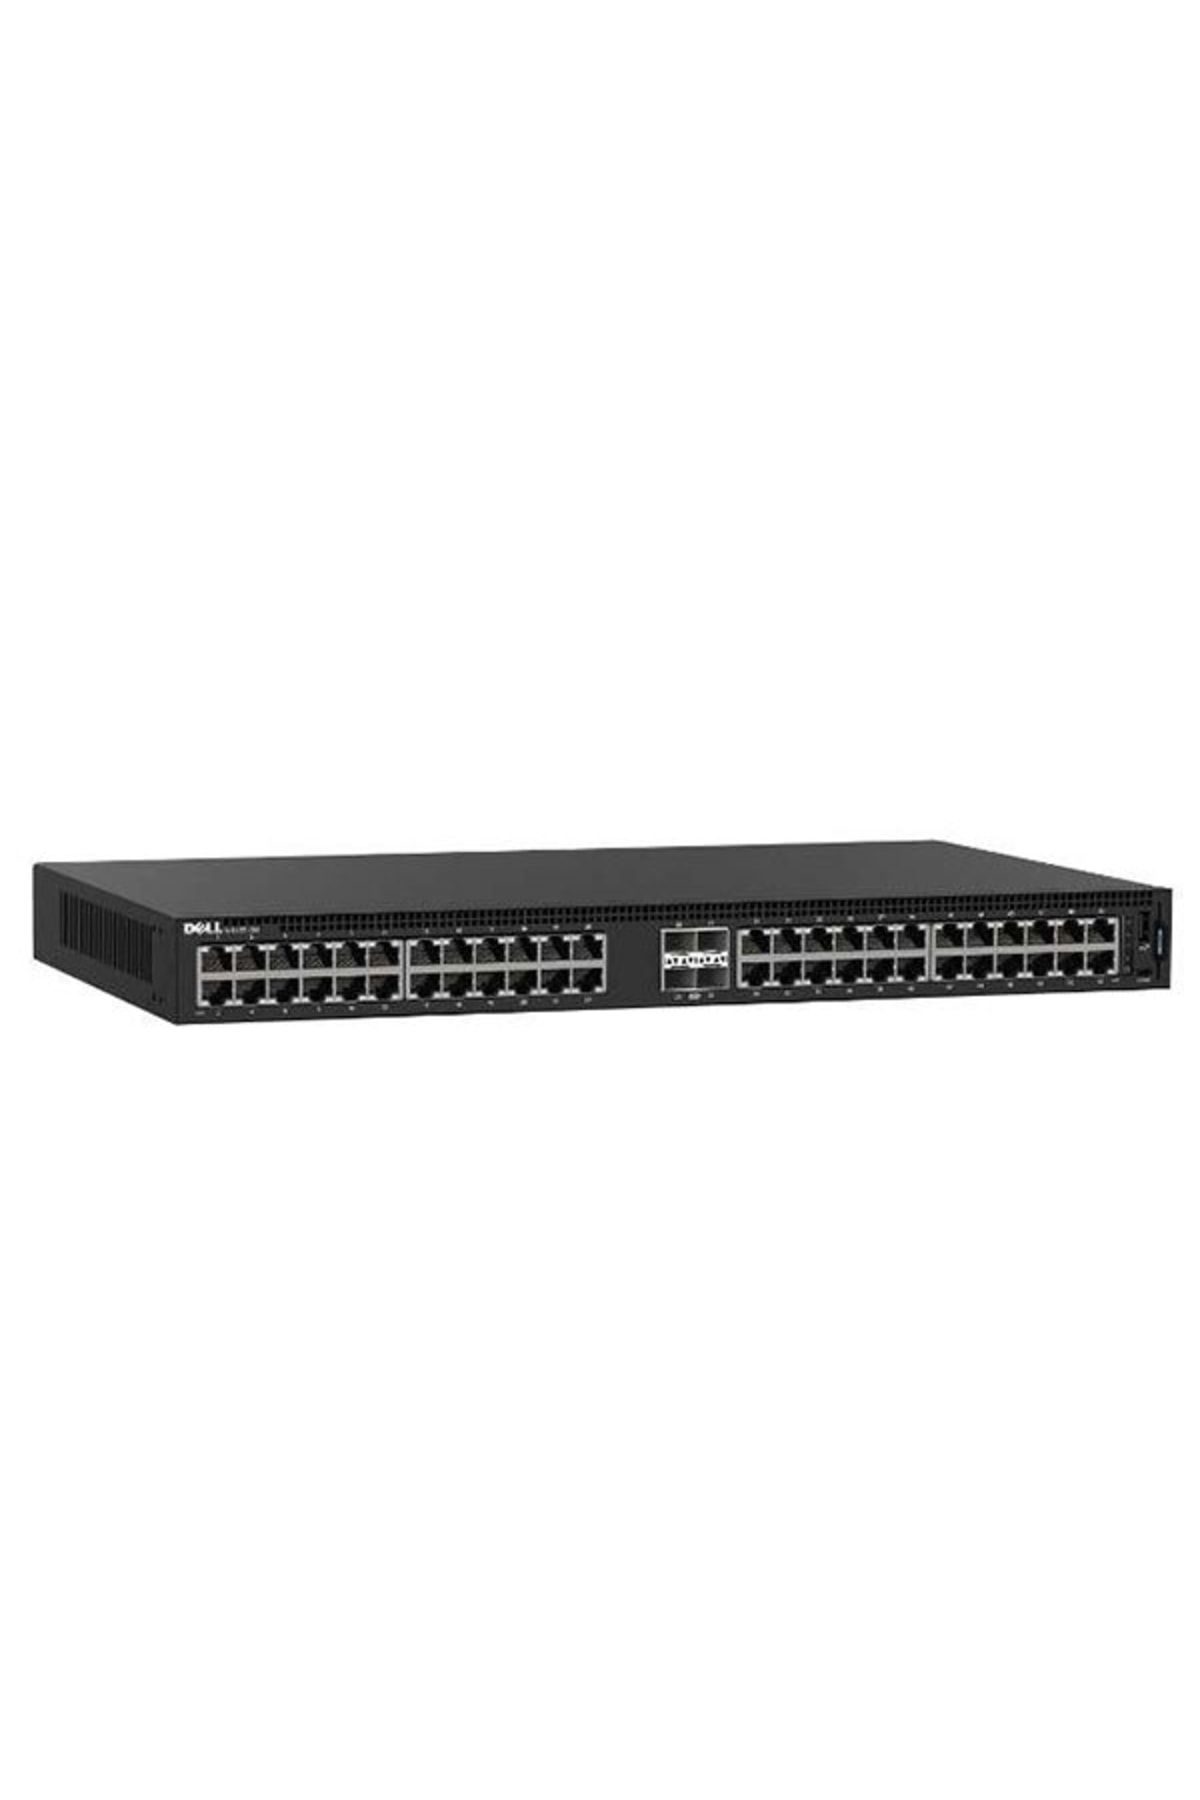 Dell Emc Switch N1148t-on, L2, 48 Ports Rj45 1gbe, 4 Ports Sfp+ 10gbe, Stacking